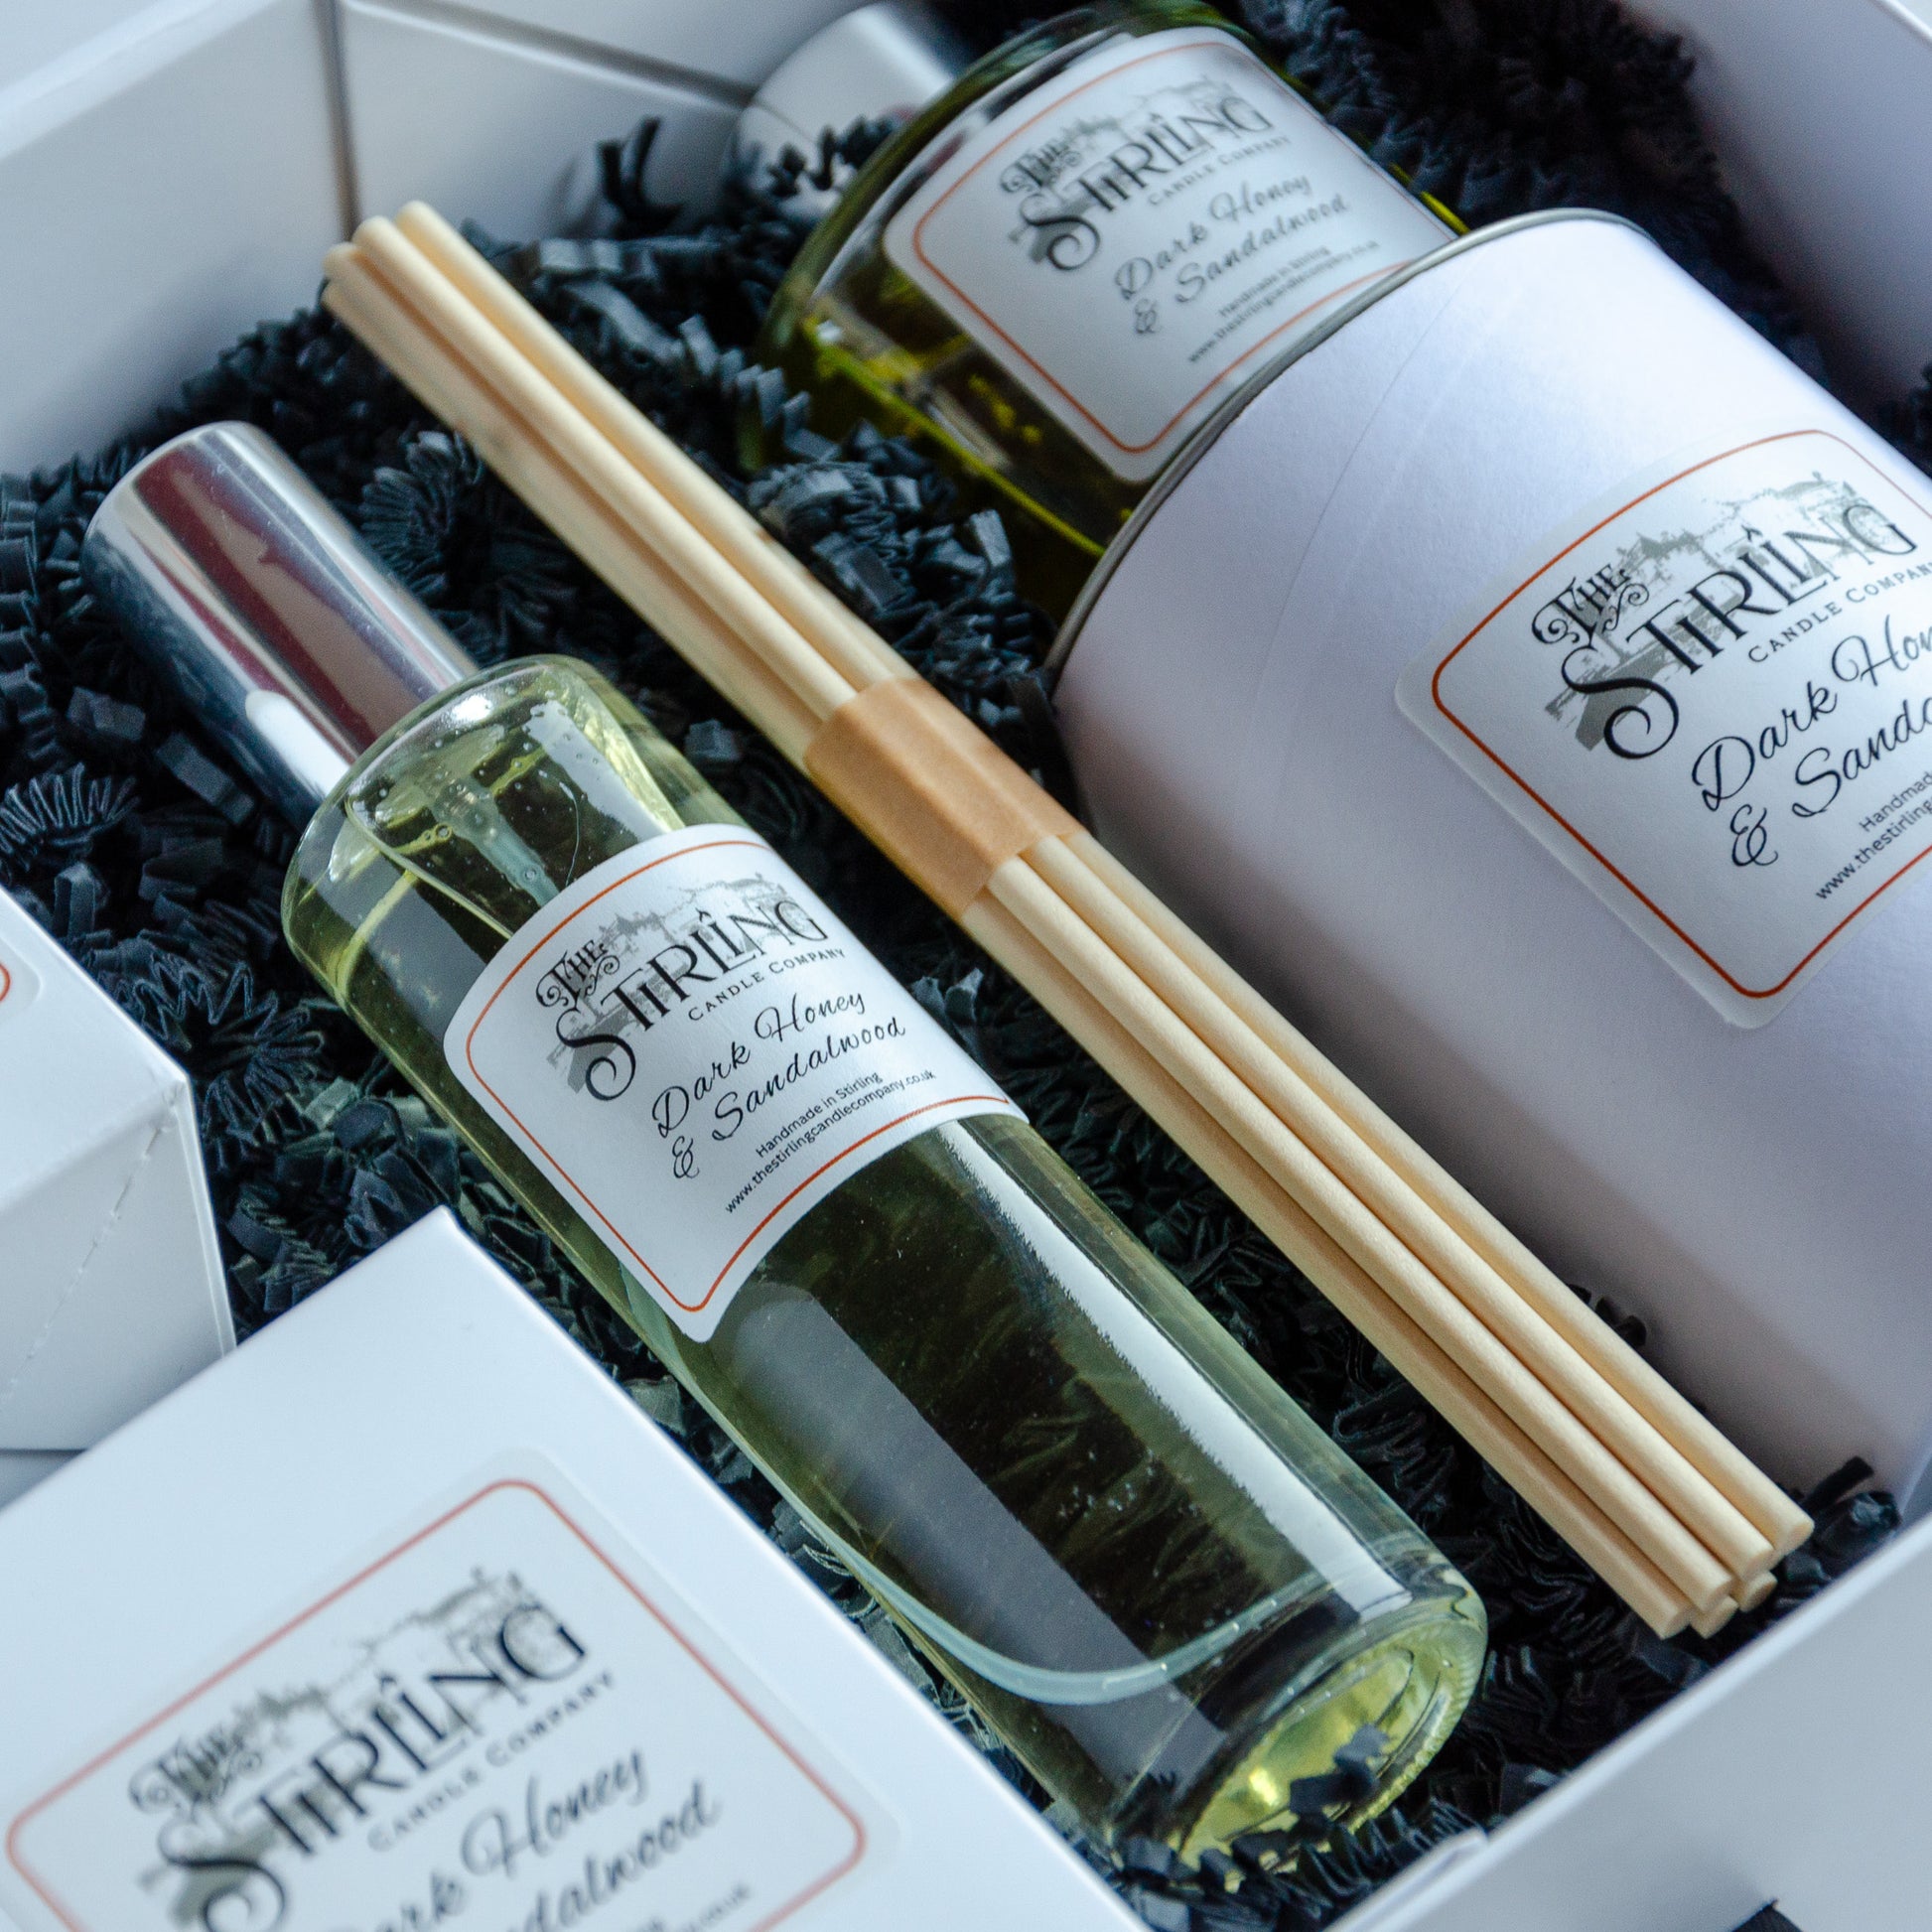 The Stirling Candle Company product gift box